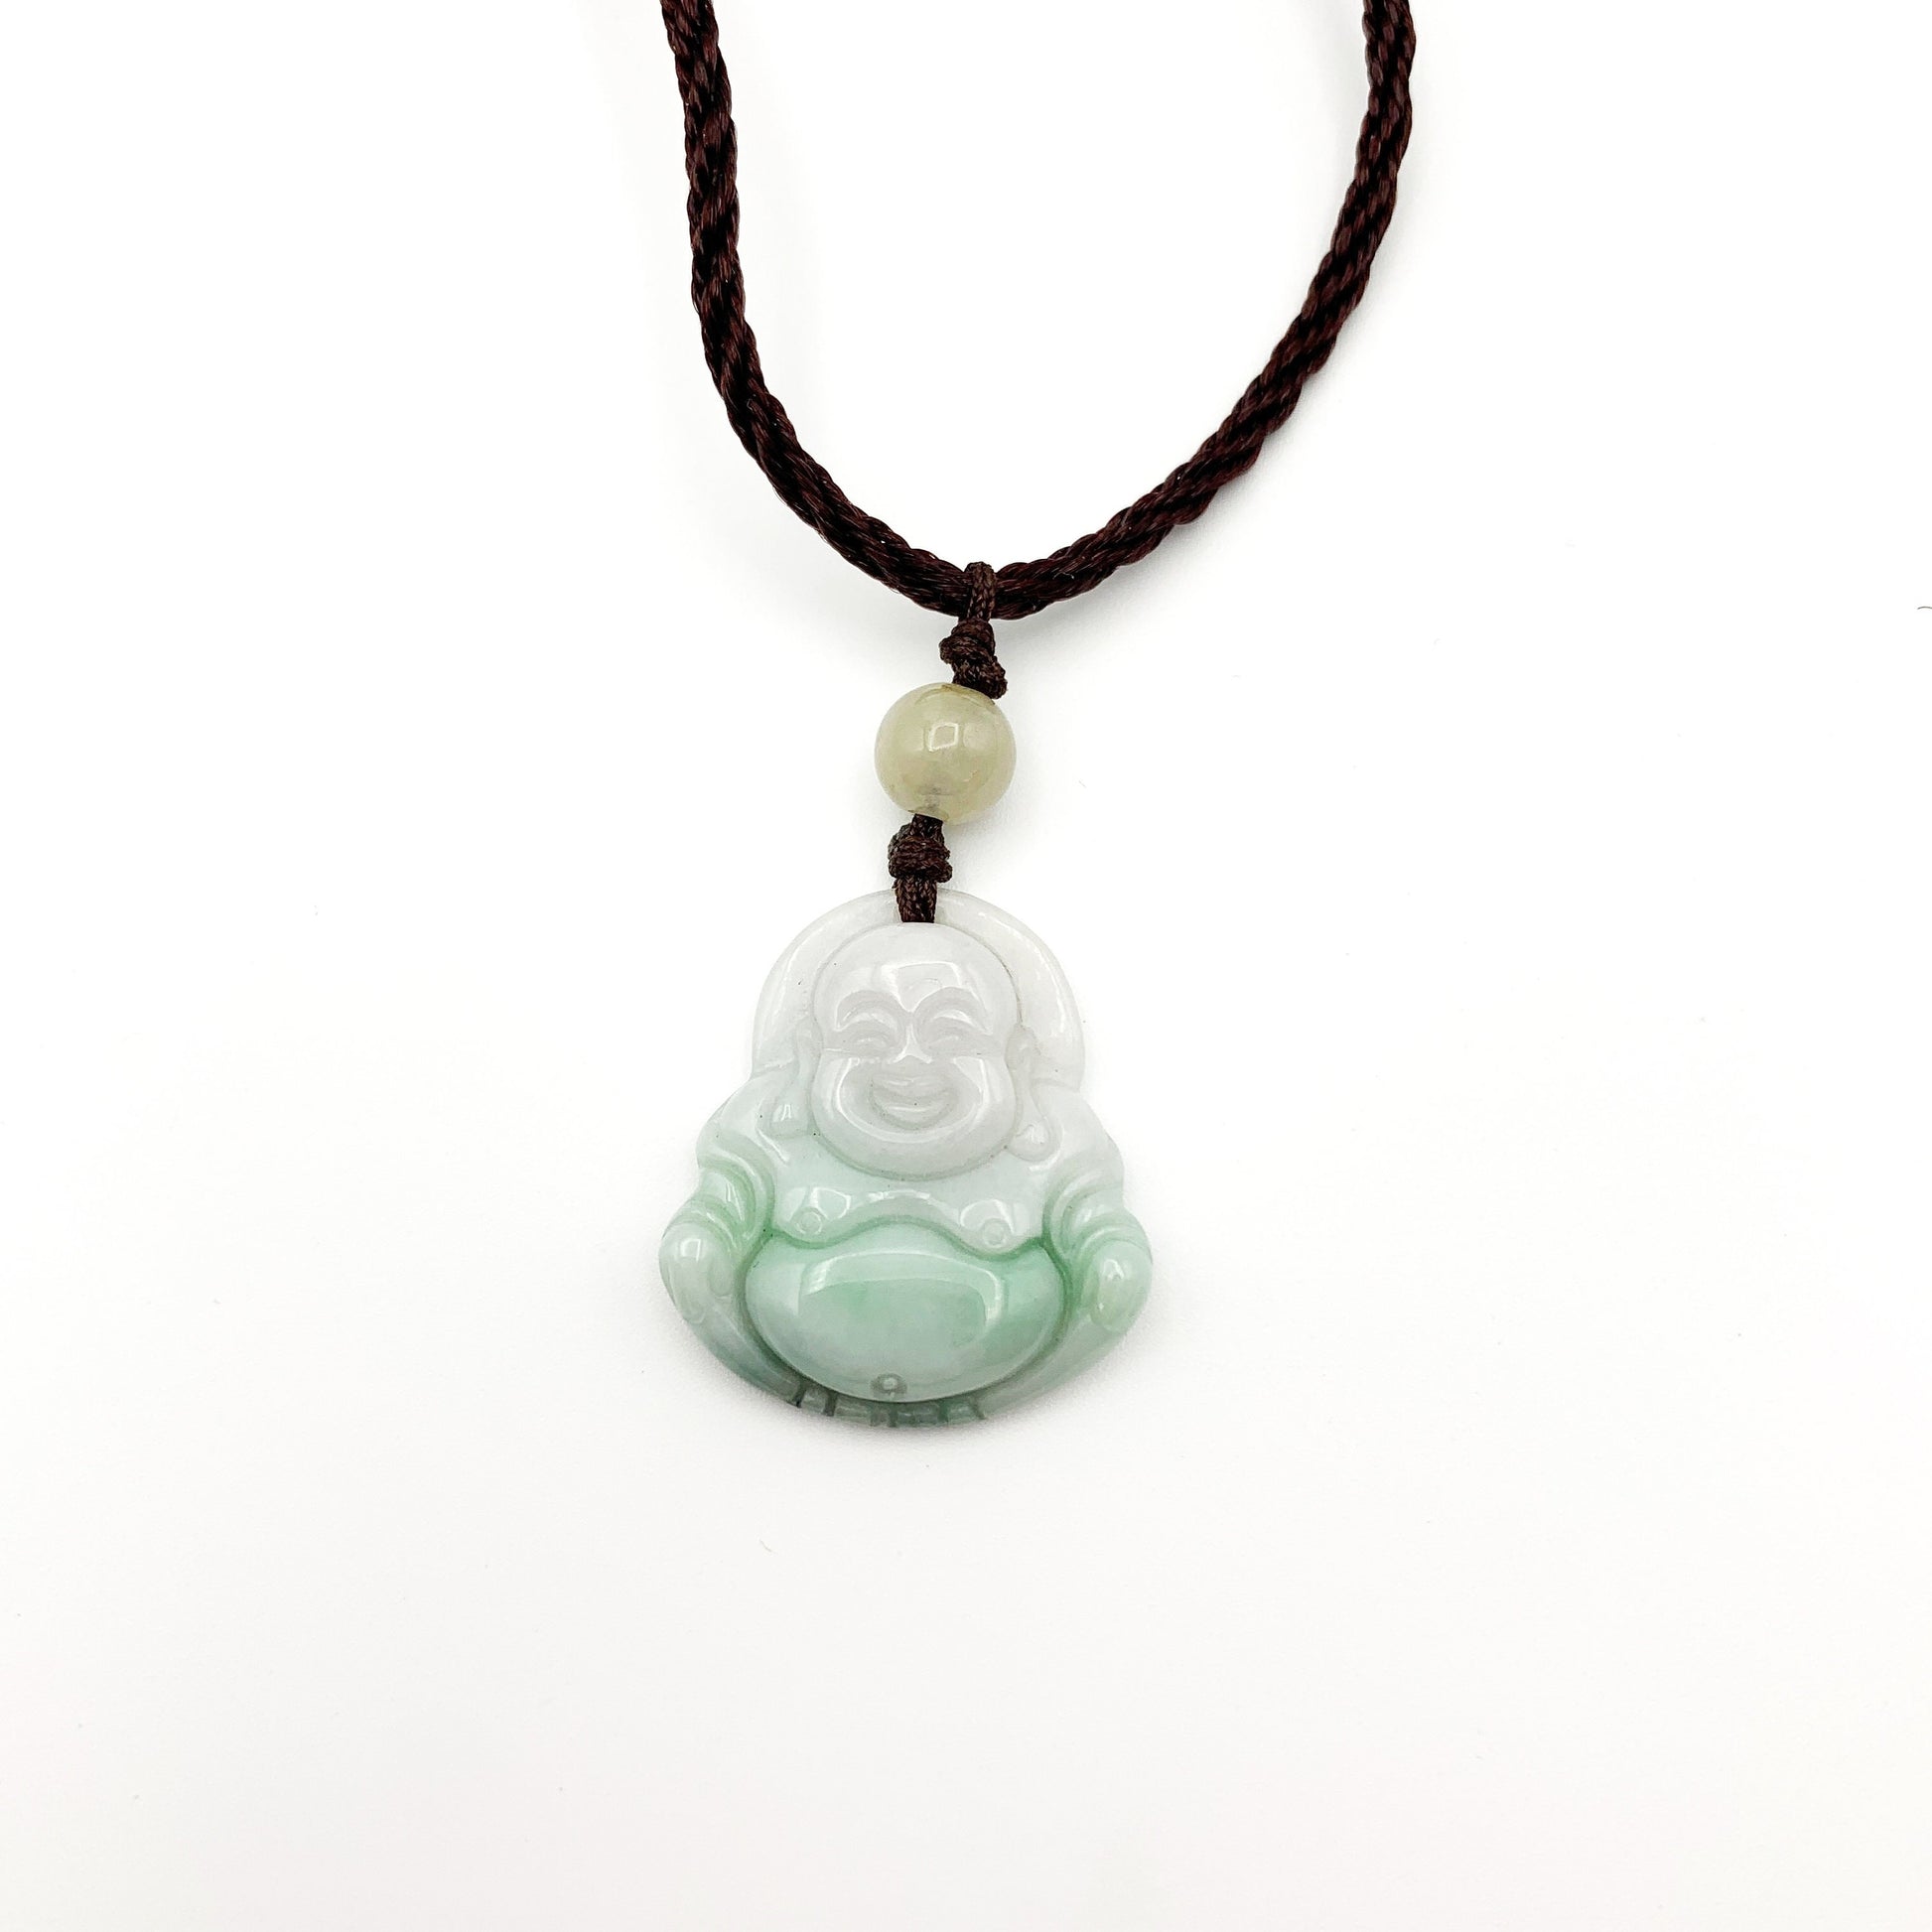 Green Jadeite Jade Happy Laughing Buddha, Budai, Bố Đại, Hand Carved Pendant Necklace, YW-0110-1646195734 - AriaDesignCollection